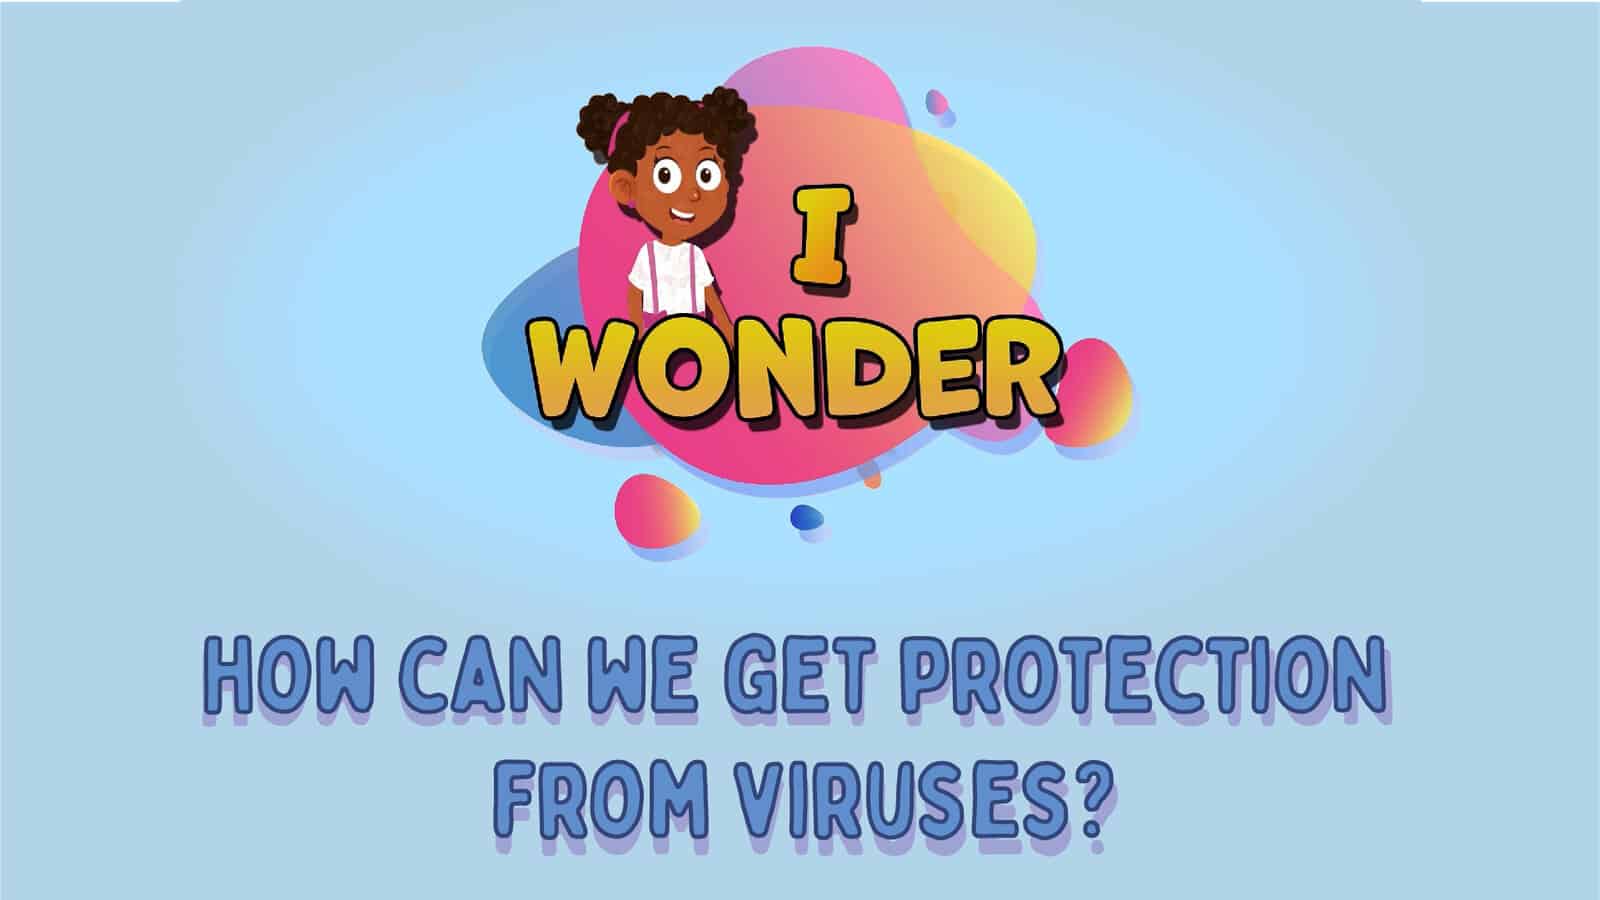 How Can We Get Protection From Viruses?